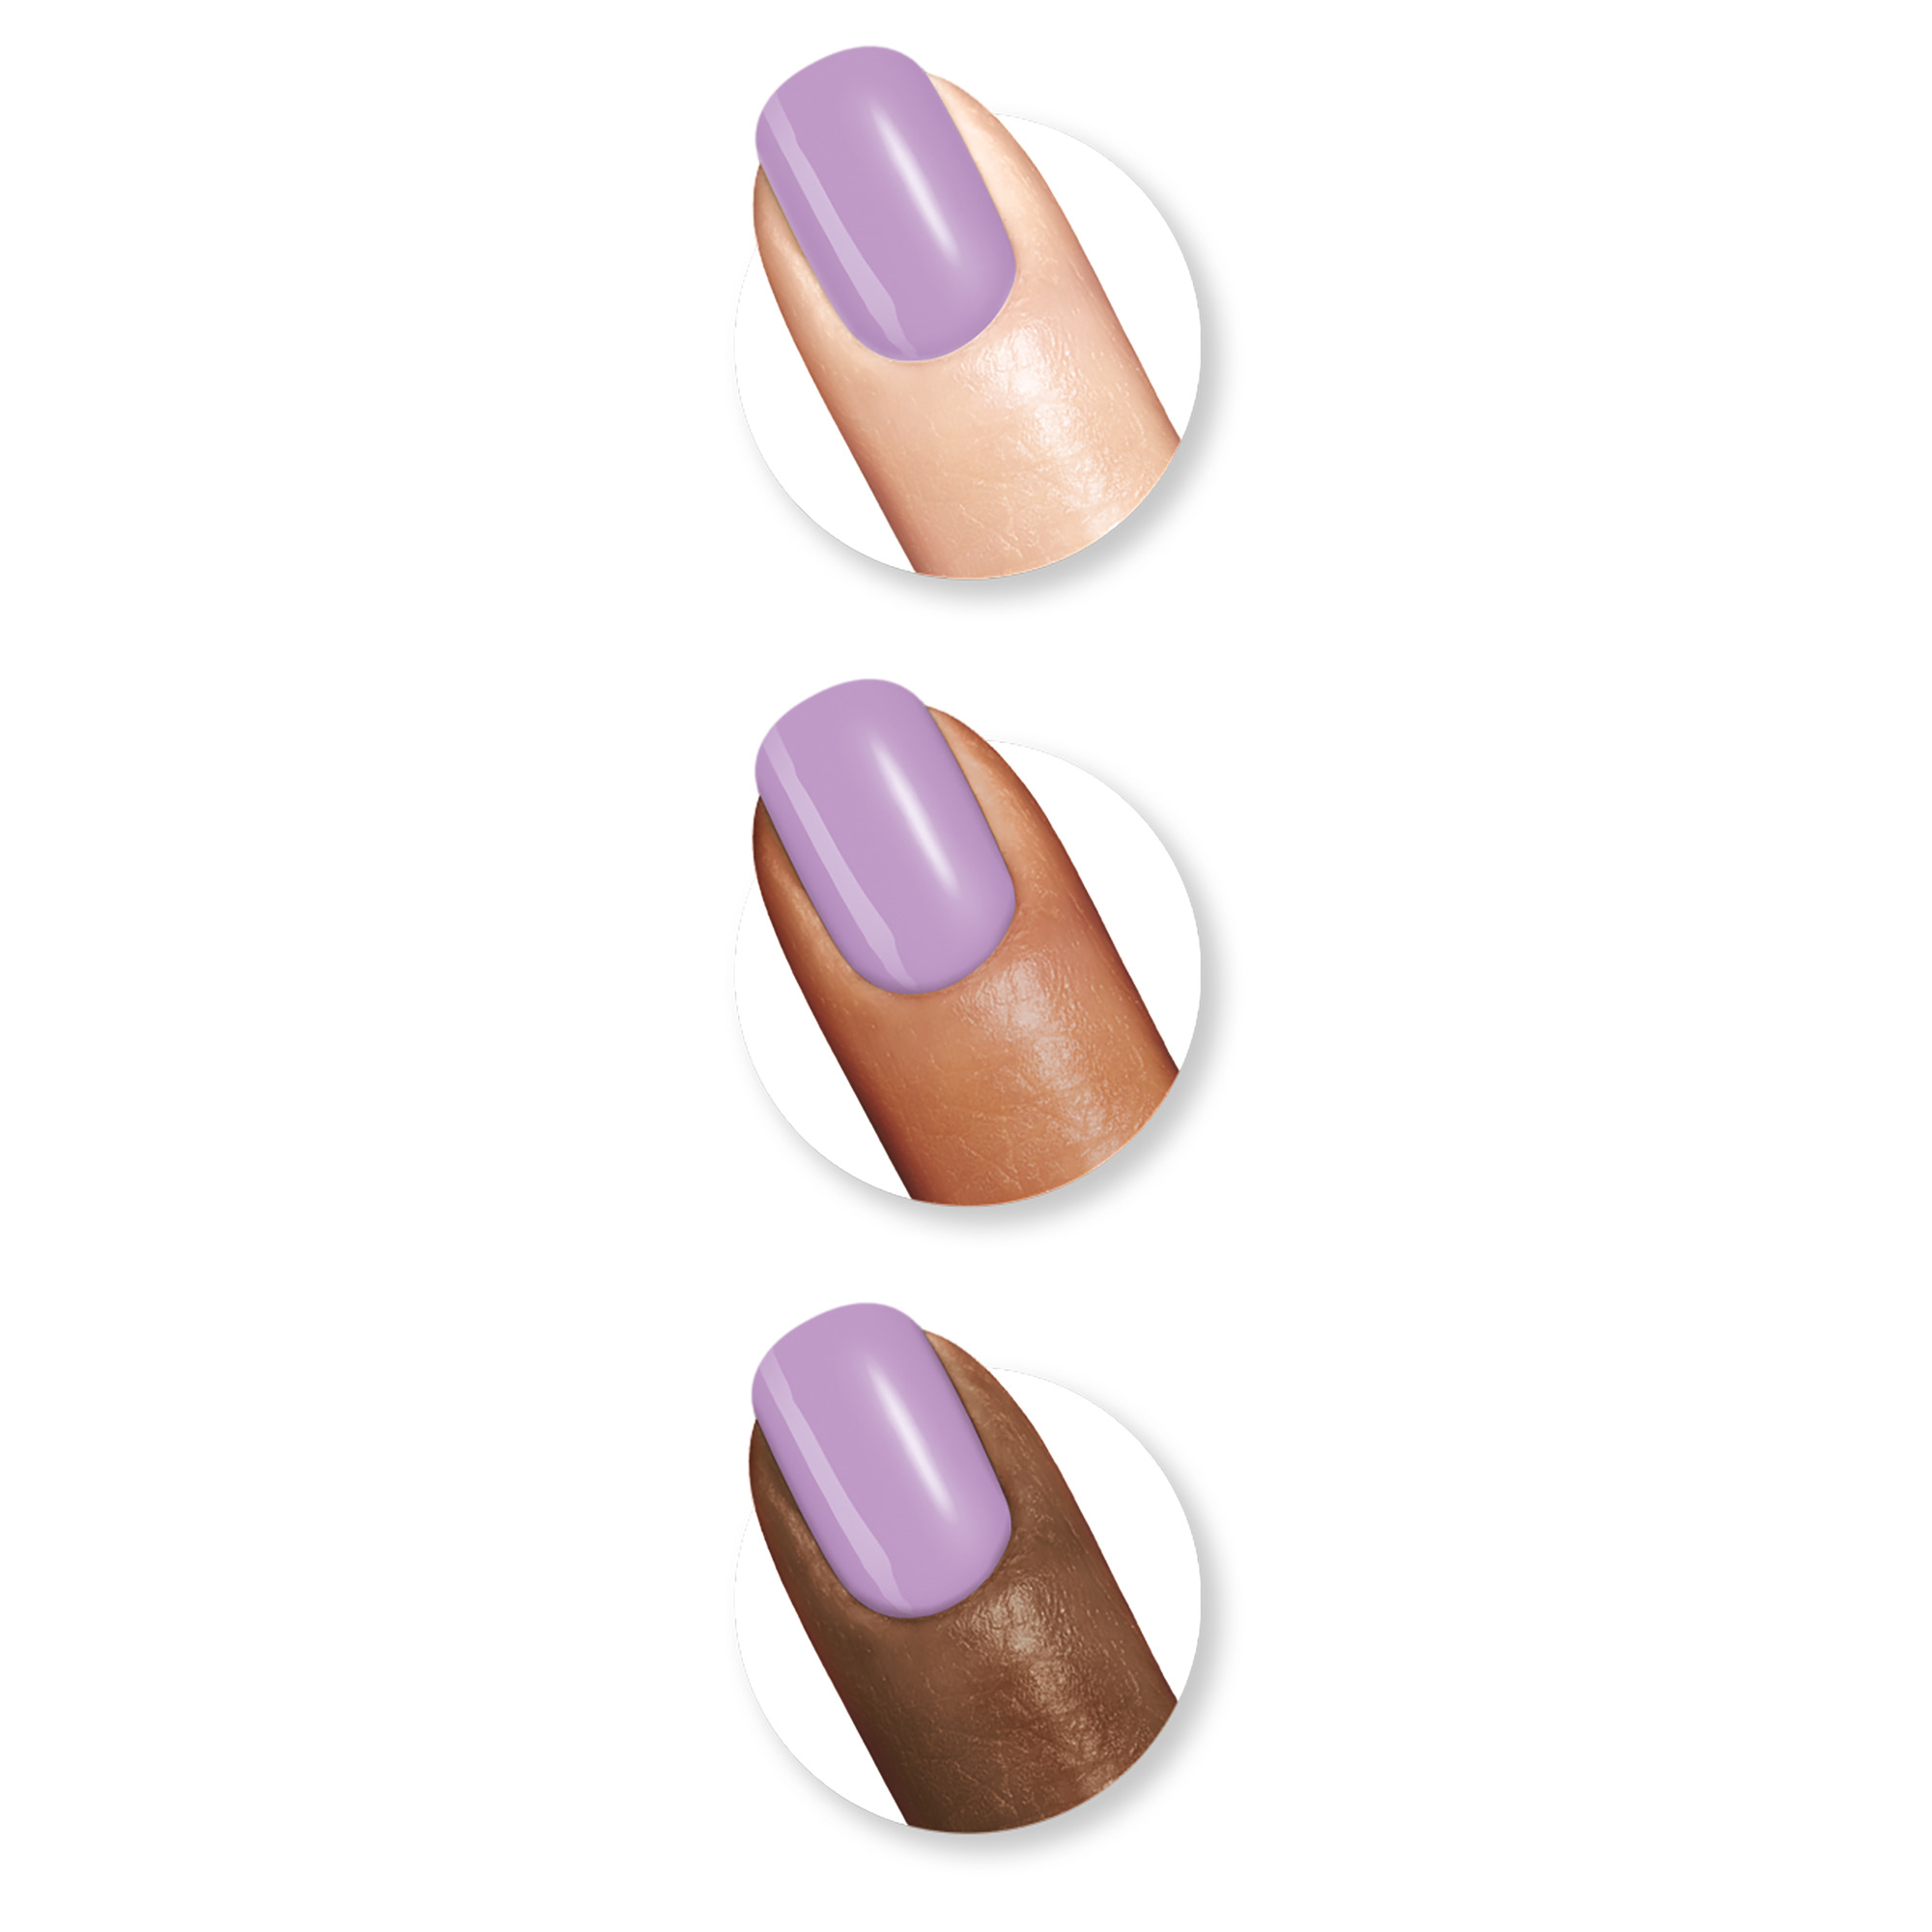 Sally Hansen Complete Salon Manicure Nail Color, What in Carnation? - image 4 of 4